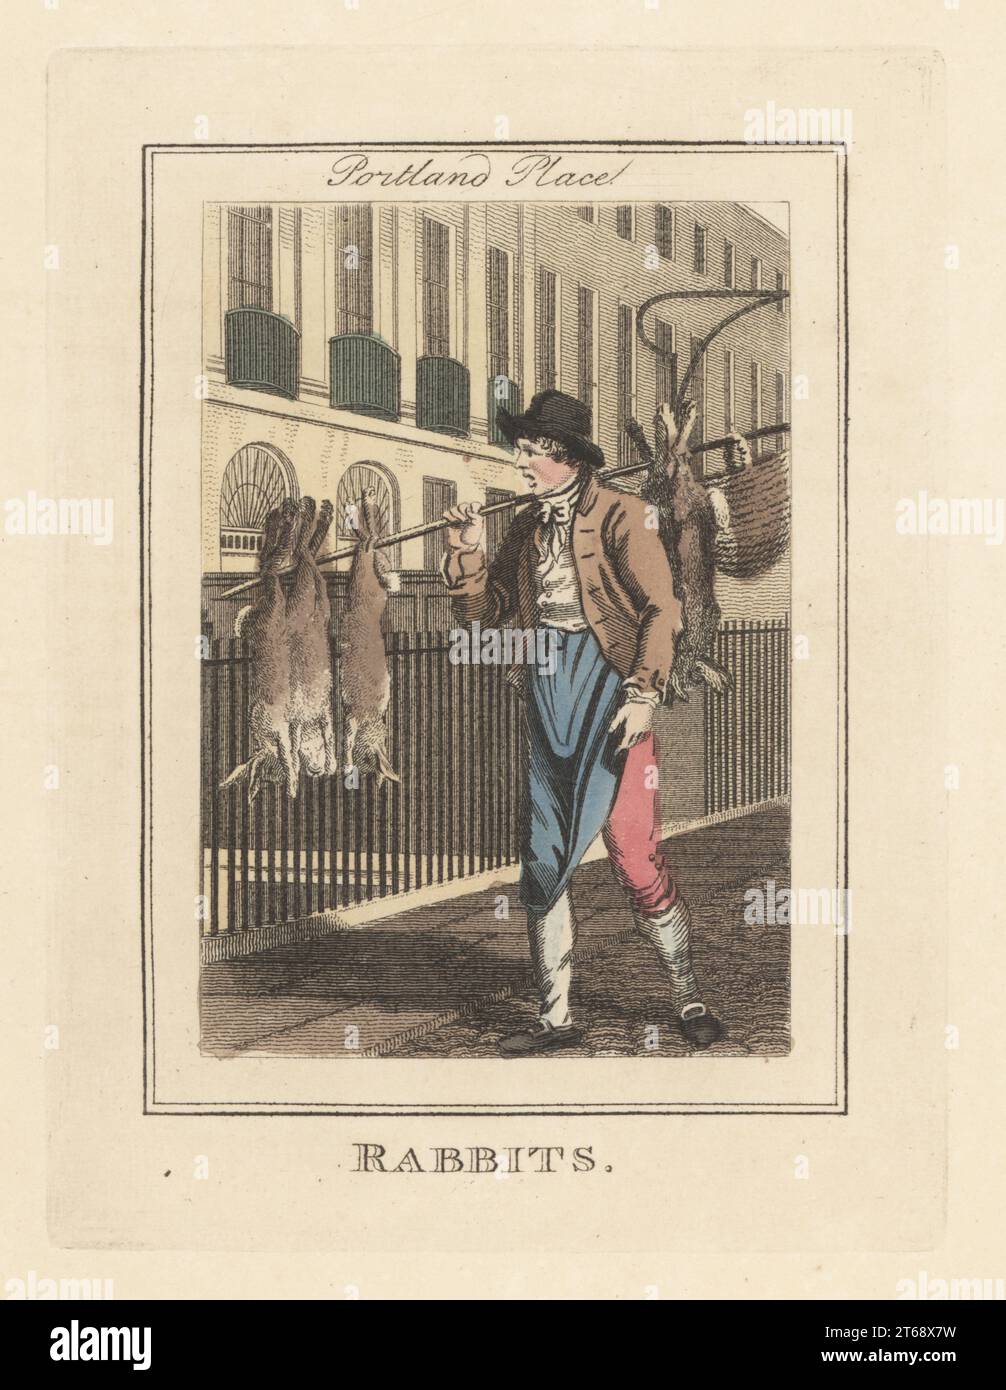 Rabbit-meat seller in Portland Place. In hat, jacket, waistcoat, apron and breeches, with wild and domesticated rabbits hanging from a pole. In front of the railings of the houses on Portland Place. Handcoloured copperplate engraving by Edward Edwards after an illustration by William Marshall Craig from Description of the Plates Representing the Itinerant Traders of London, Richard Phillips, No. 71 St Pauls Churchyard, London, 1805. Stock Photo